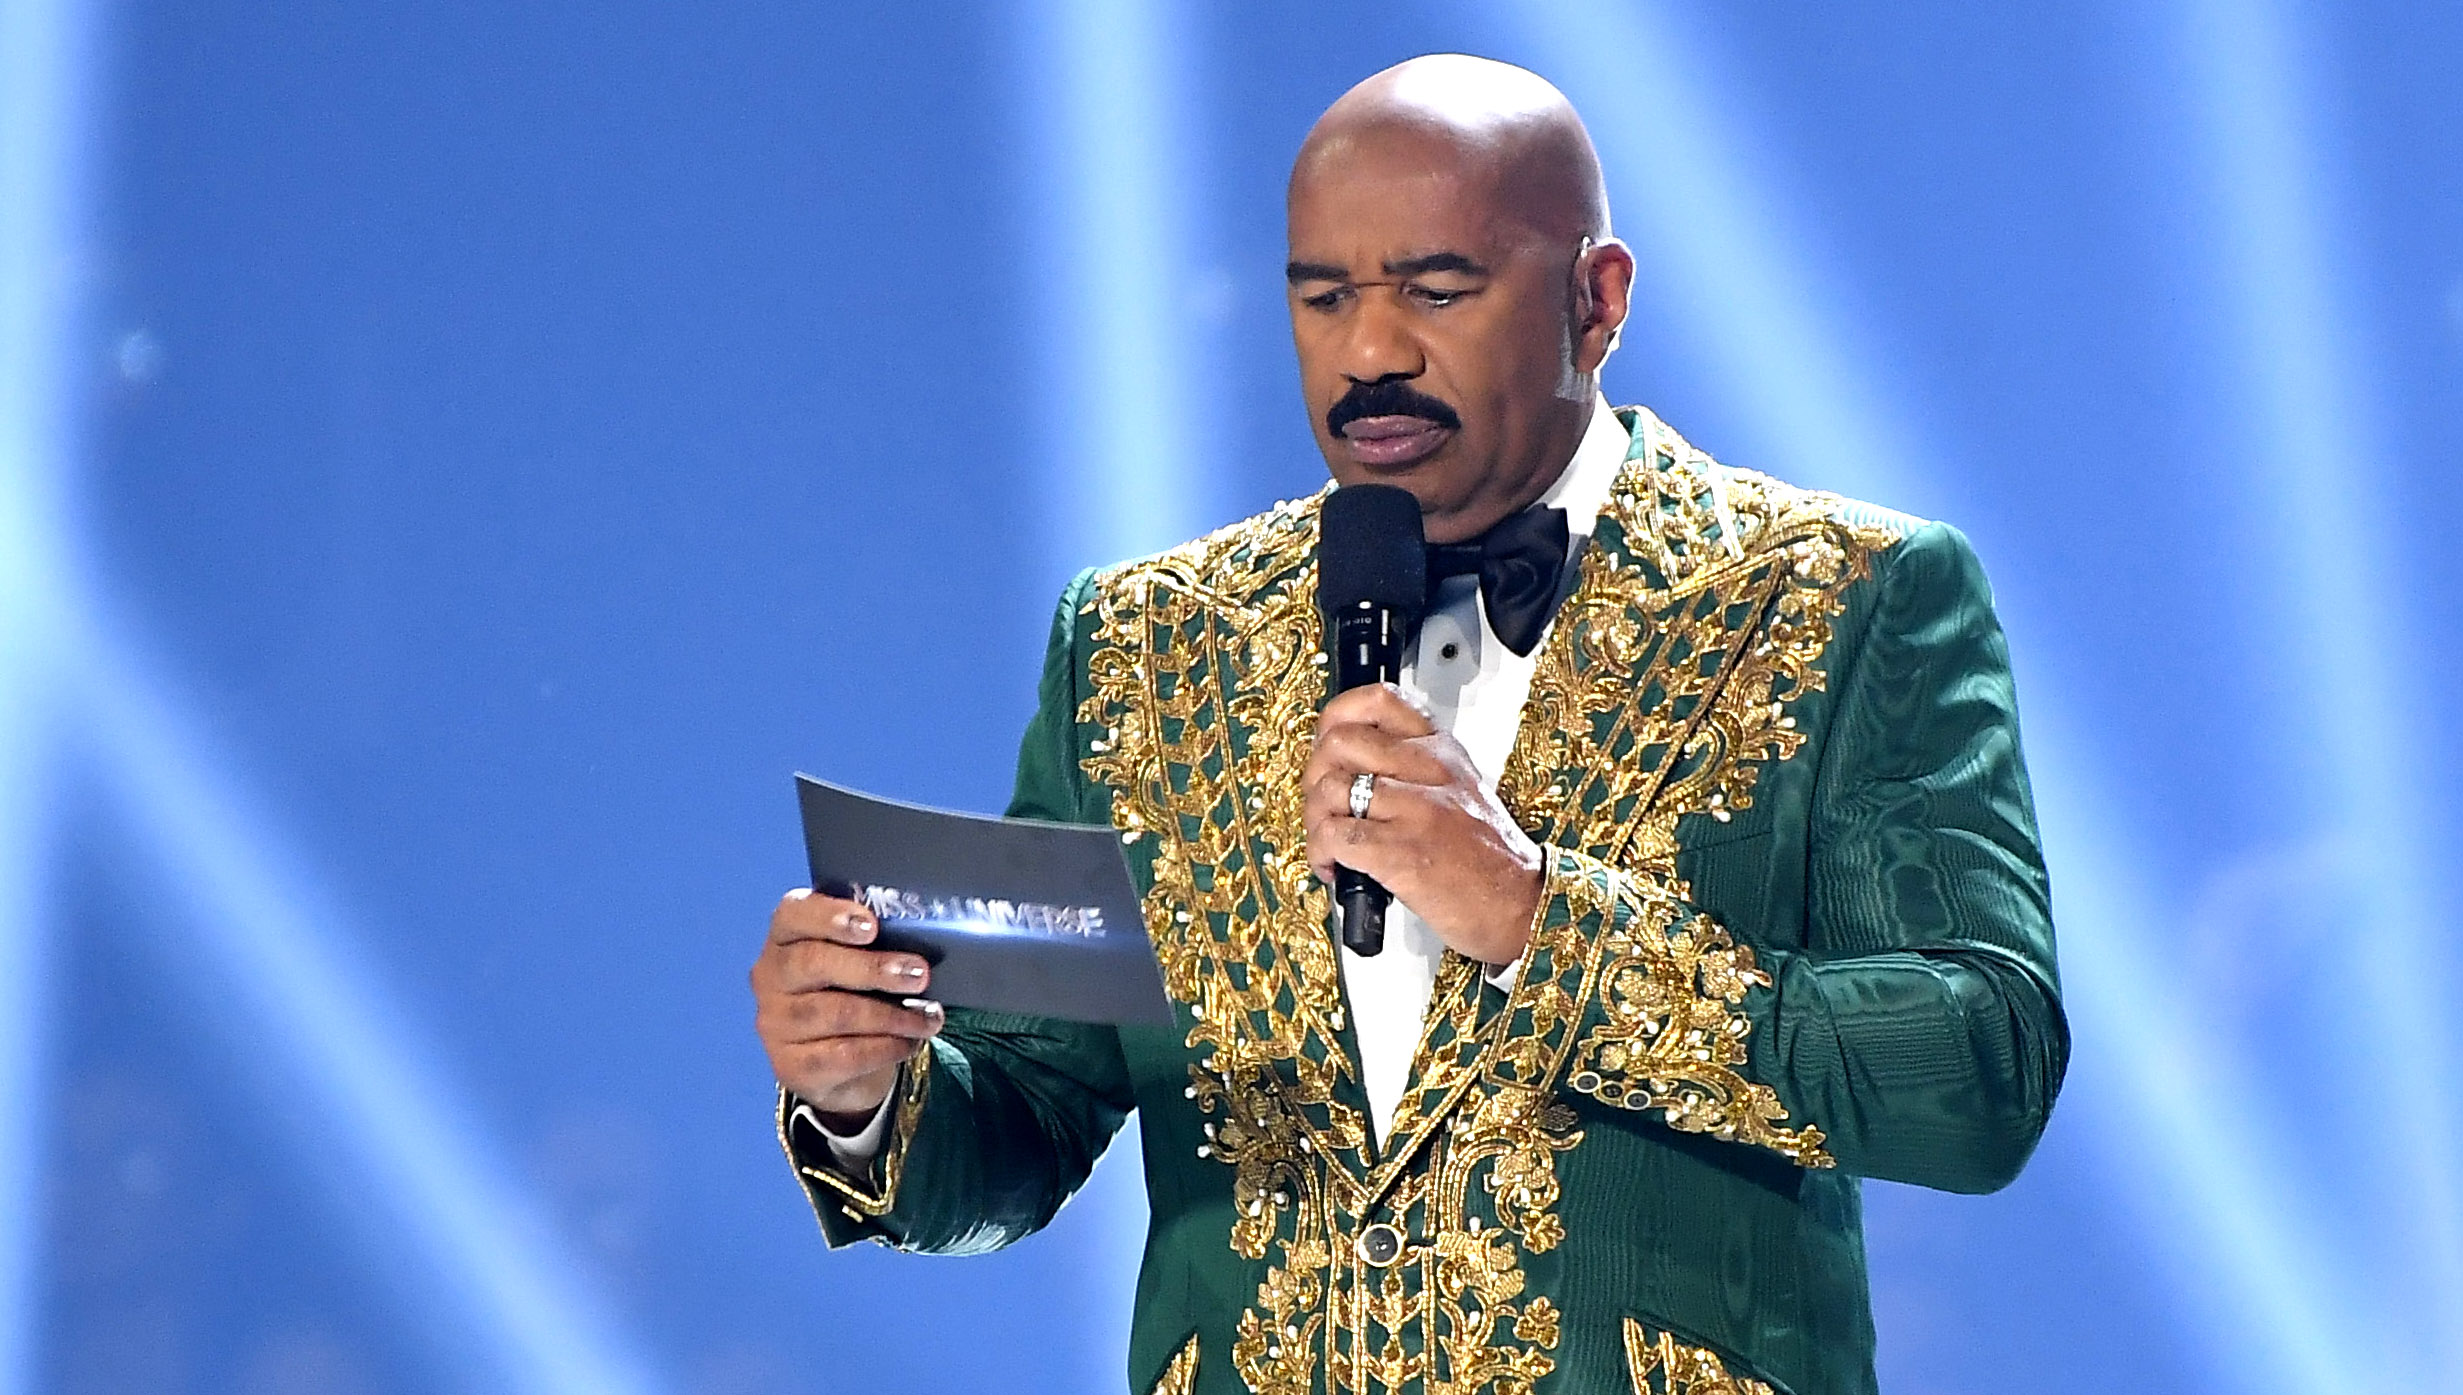 Steve Harvey Involved In Another Blunder Announcing A Winner During The